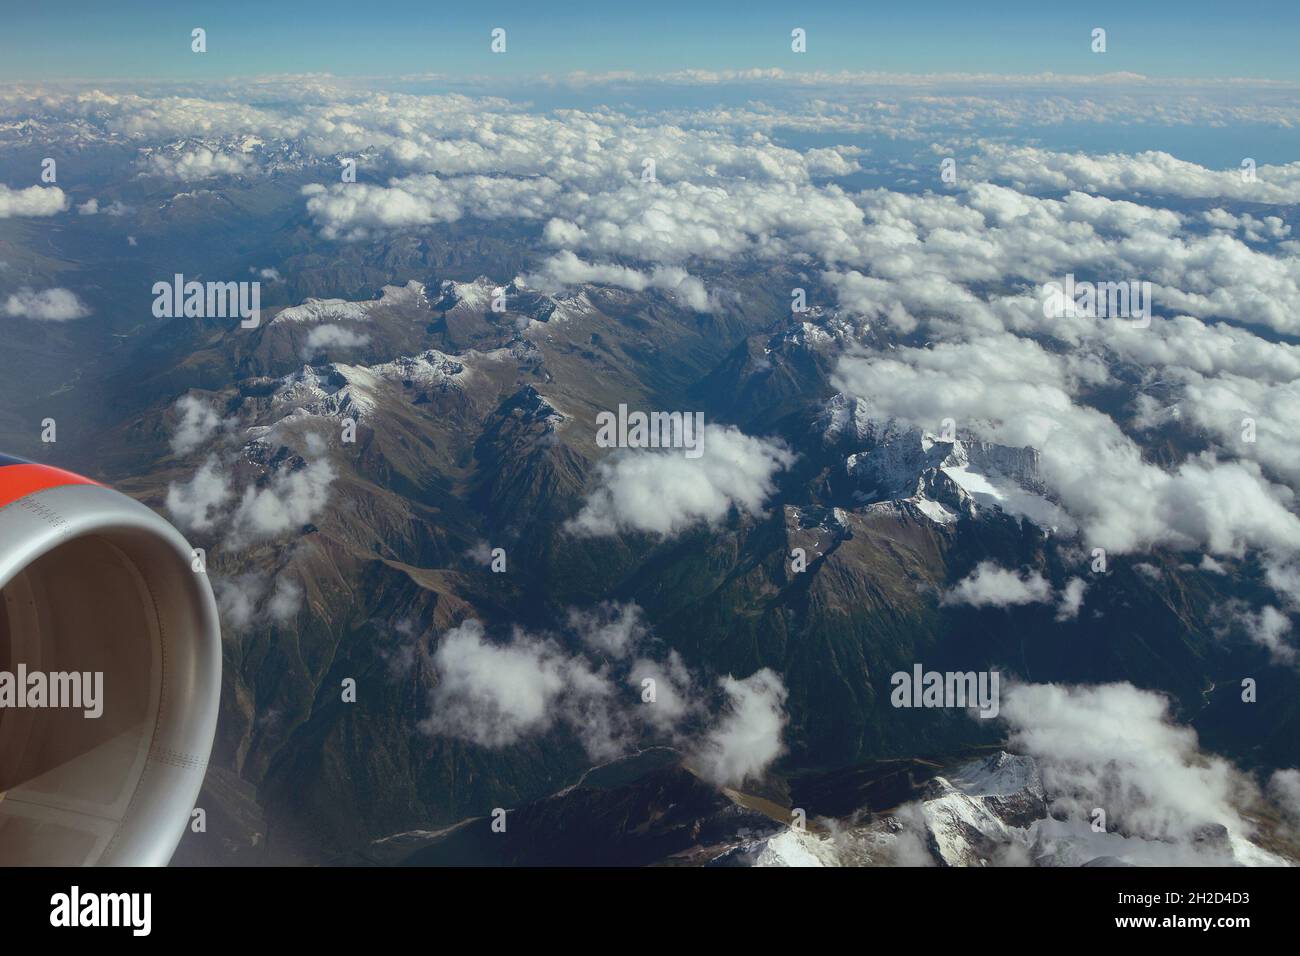 Plane view of mountains and clouds. Caucasus, Krasnodar Territory, Russia Stock Photo